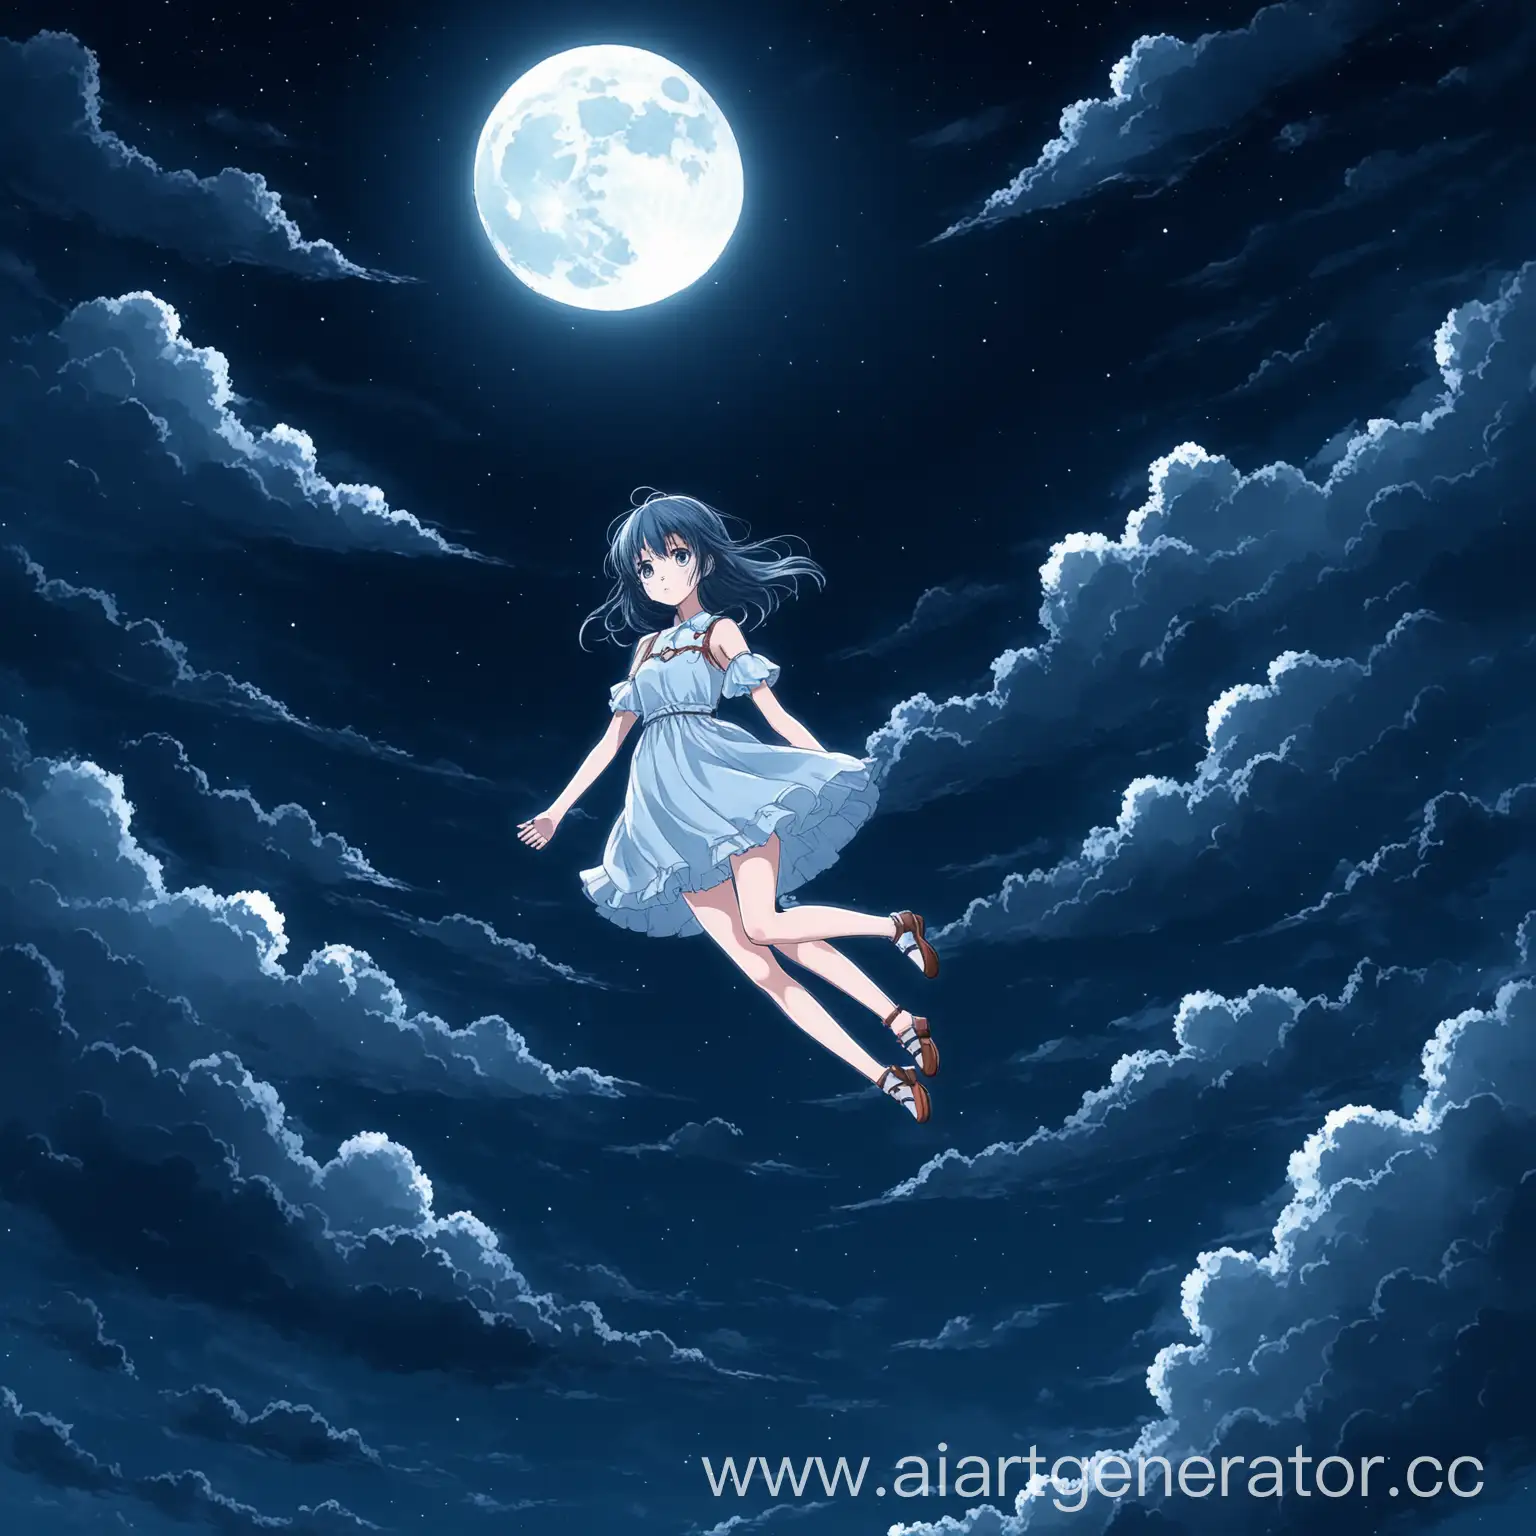 Dreamy-Anime-Girl-Floating-Among-Moonlit-Clouds